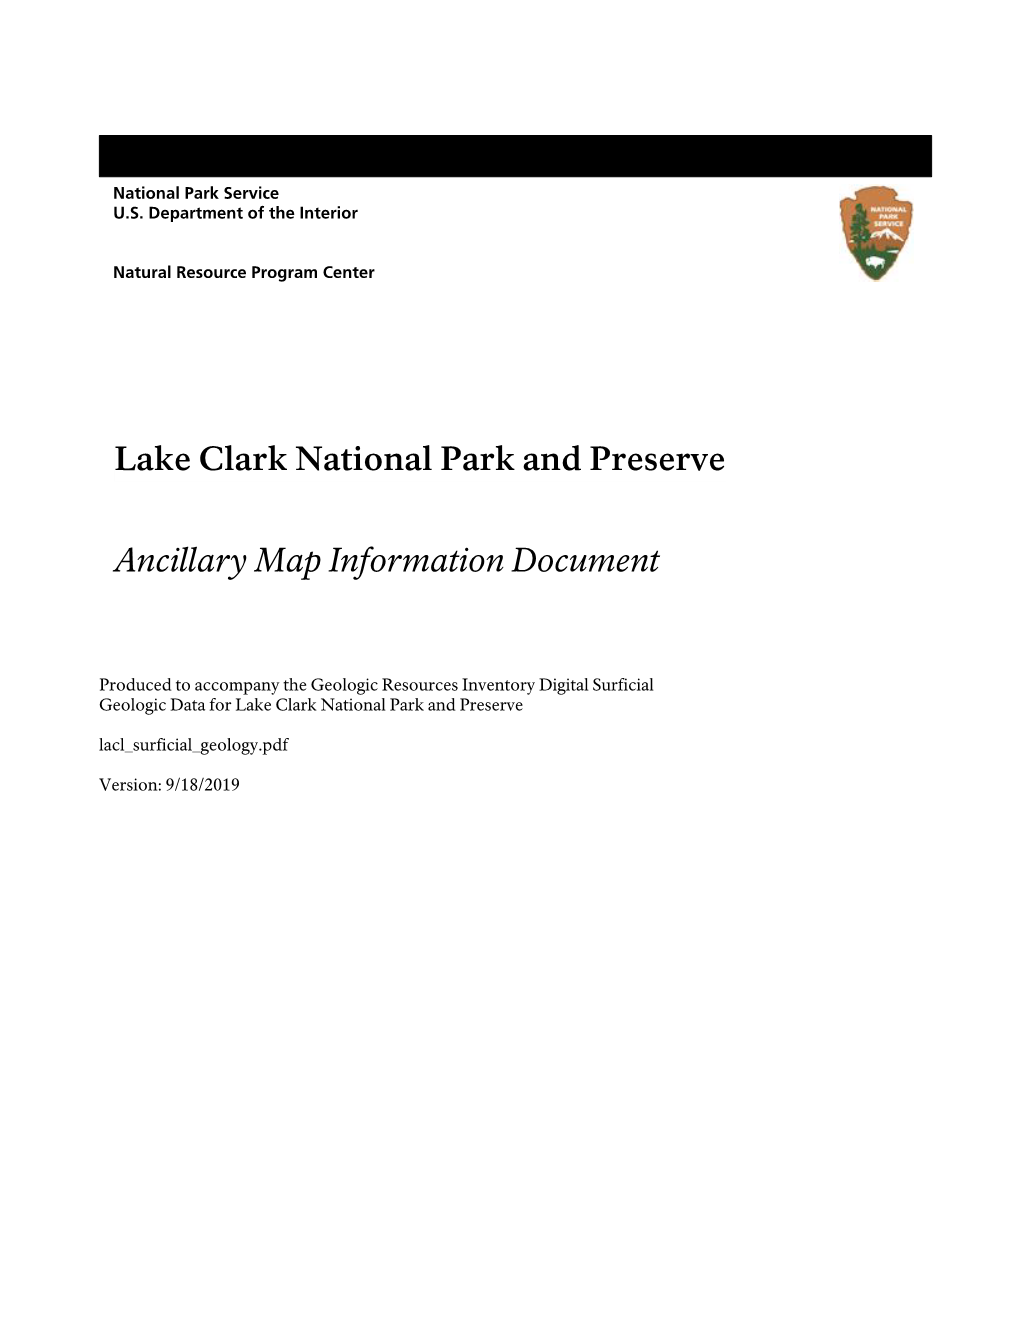 Geologic Resources Inventory Map Document for Lake Clark National Park and Preserve